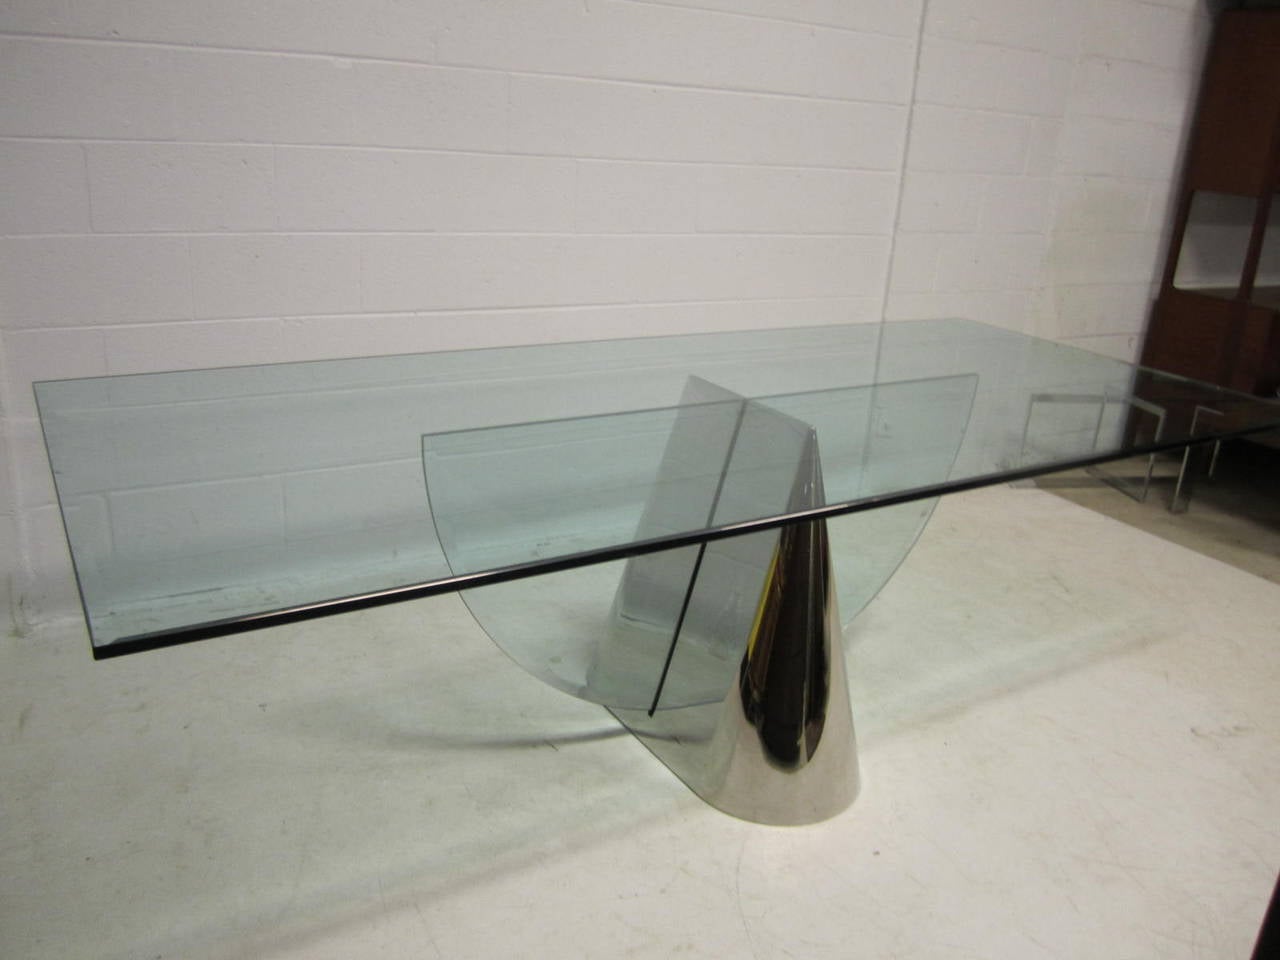 When it comes to chic and sophisticated glass design, this table takes the prize. Minimalistic, visually exciting and beautifully constructed, it really is an extraordinary design. This Fine table is in excellent vintage condition. Polished